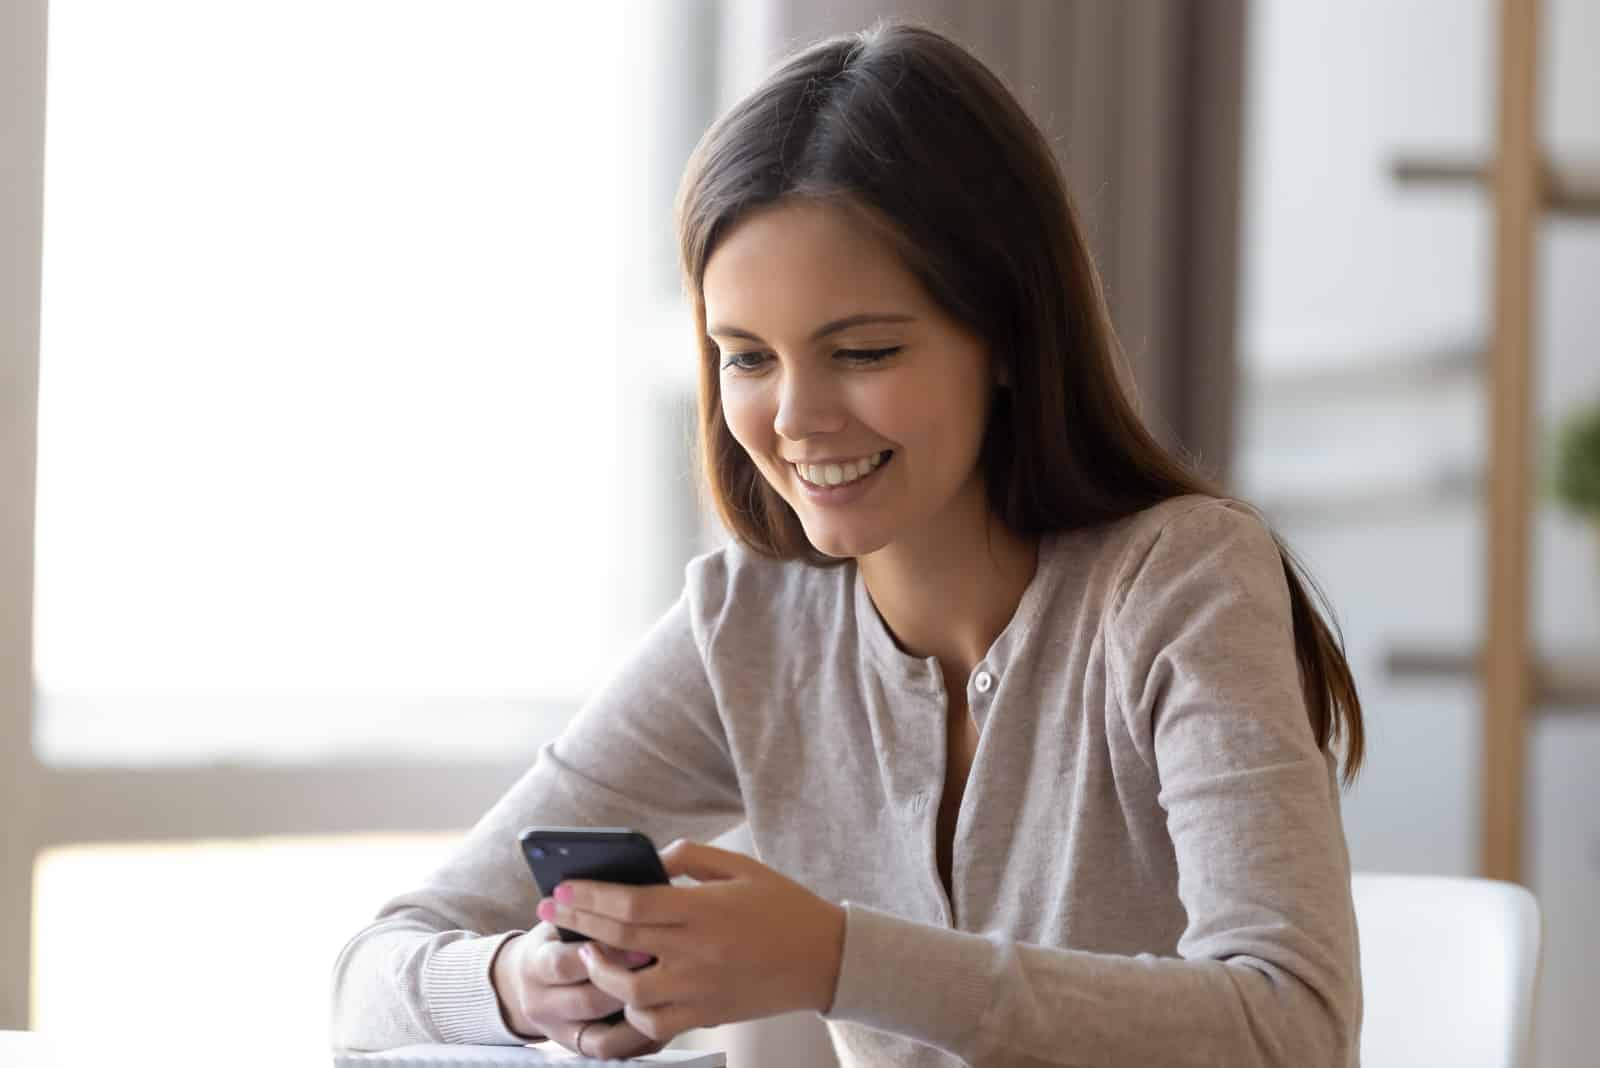 a smiling woman sitting at a table and pressing a phone